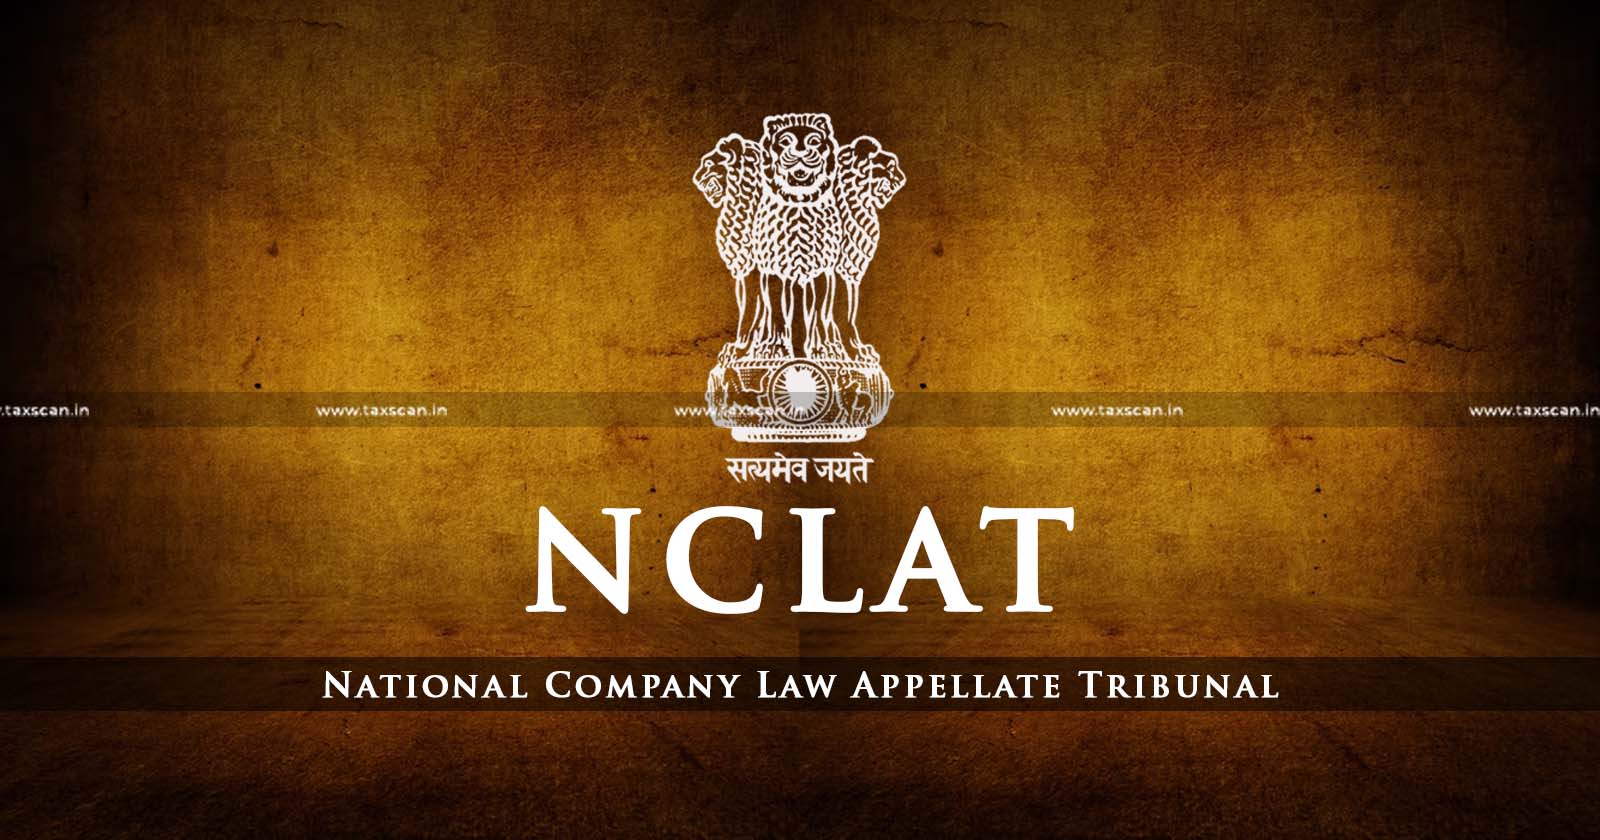 Amount of Unsuccessful Auction Bidder - Auction Bidder - Auction Bidder Forfeited - Added into account of CD - corporate debtor - Benefitting Stakeholders of CD Company - Amounts To Undue Enrichment - NCLAT